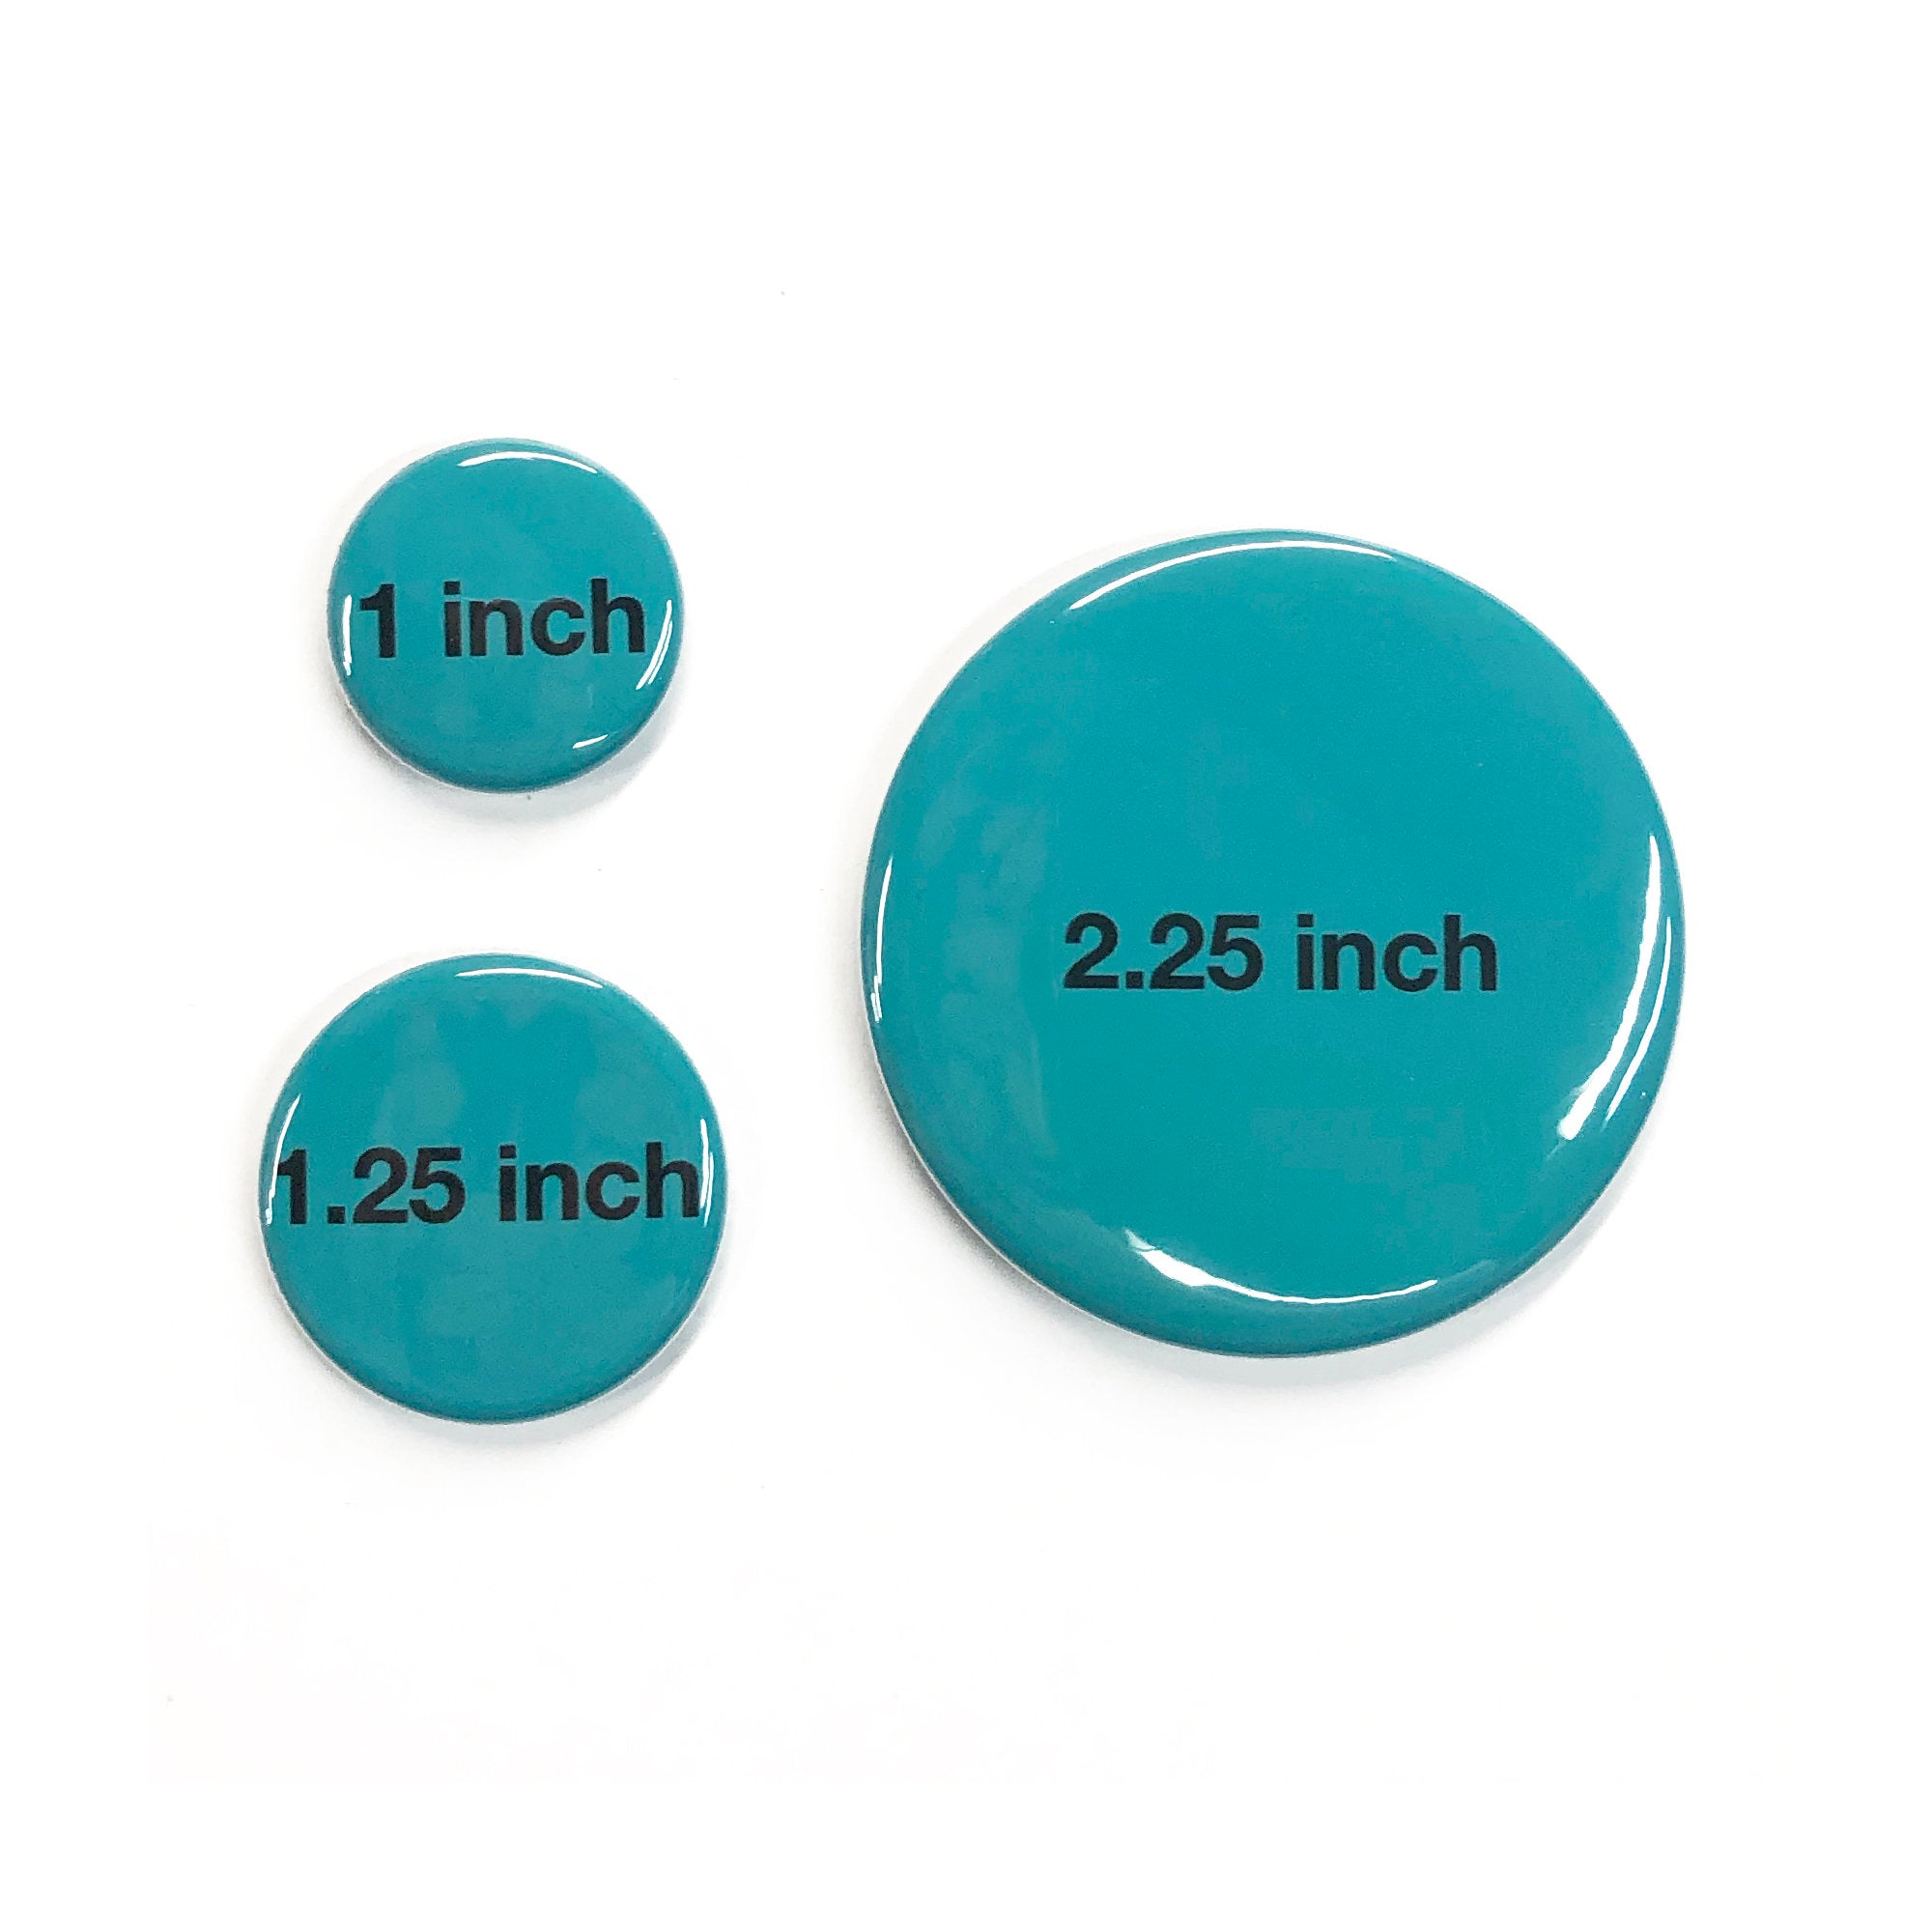 Don't Forget to Be Awesome Magnet, Pinback Button or Pocket Mirror